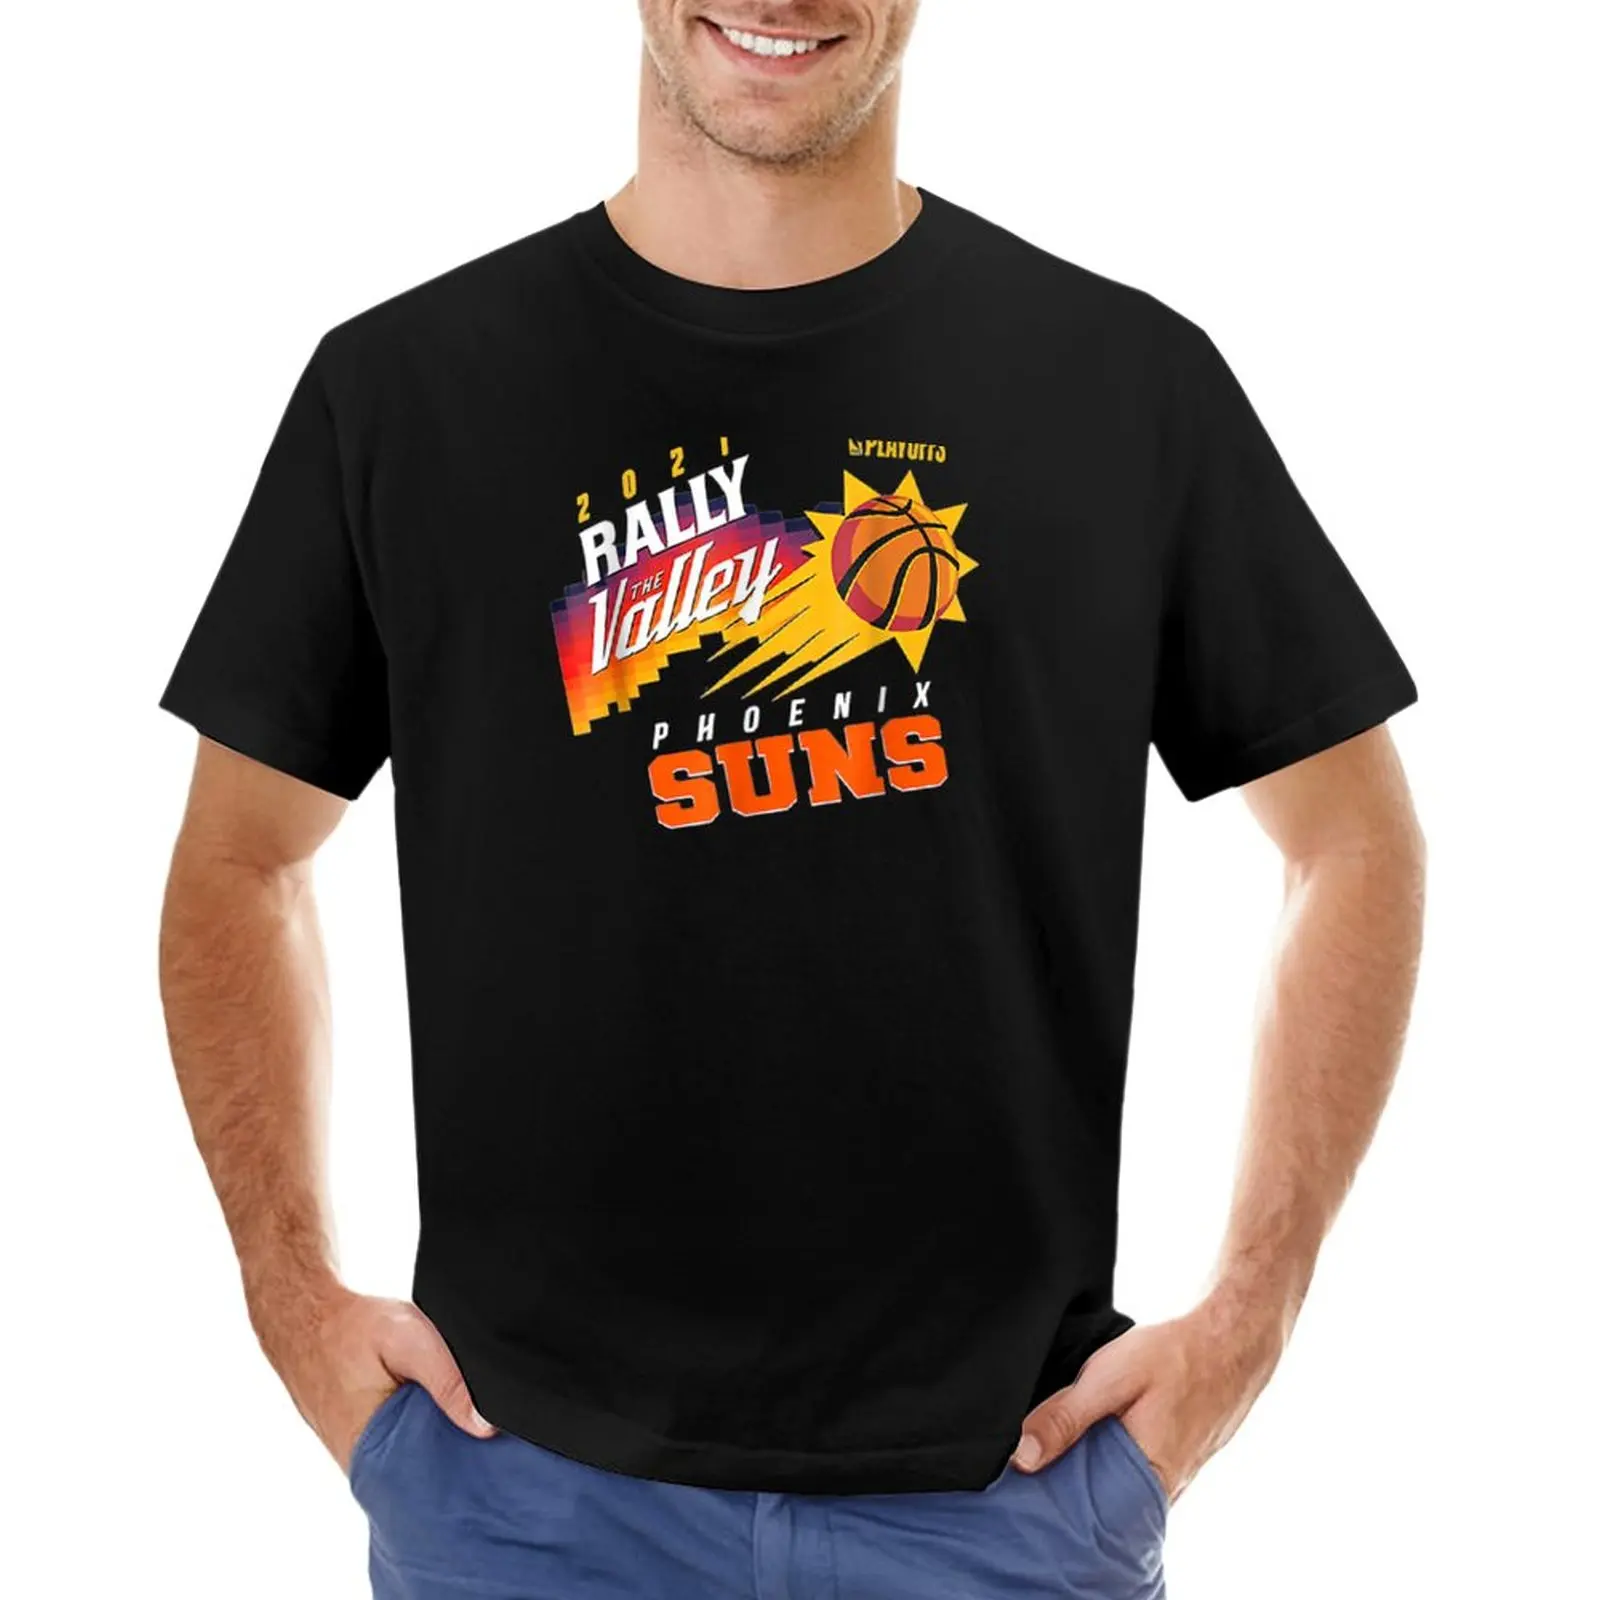 Phoenix Suns Nike 2021 NBA Playoffs Mantra Rally the Valley shirt, hoodie,  sweater, long sleeve and tank top